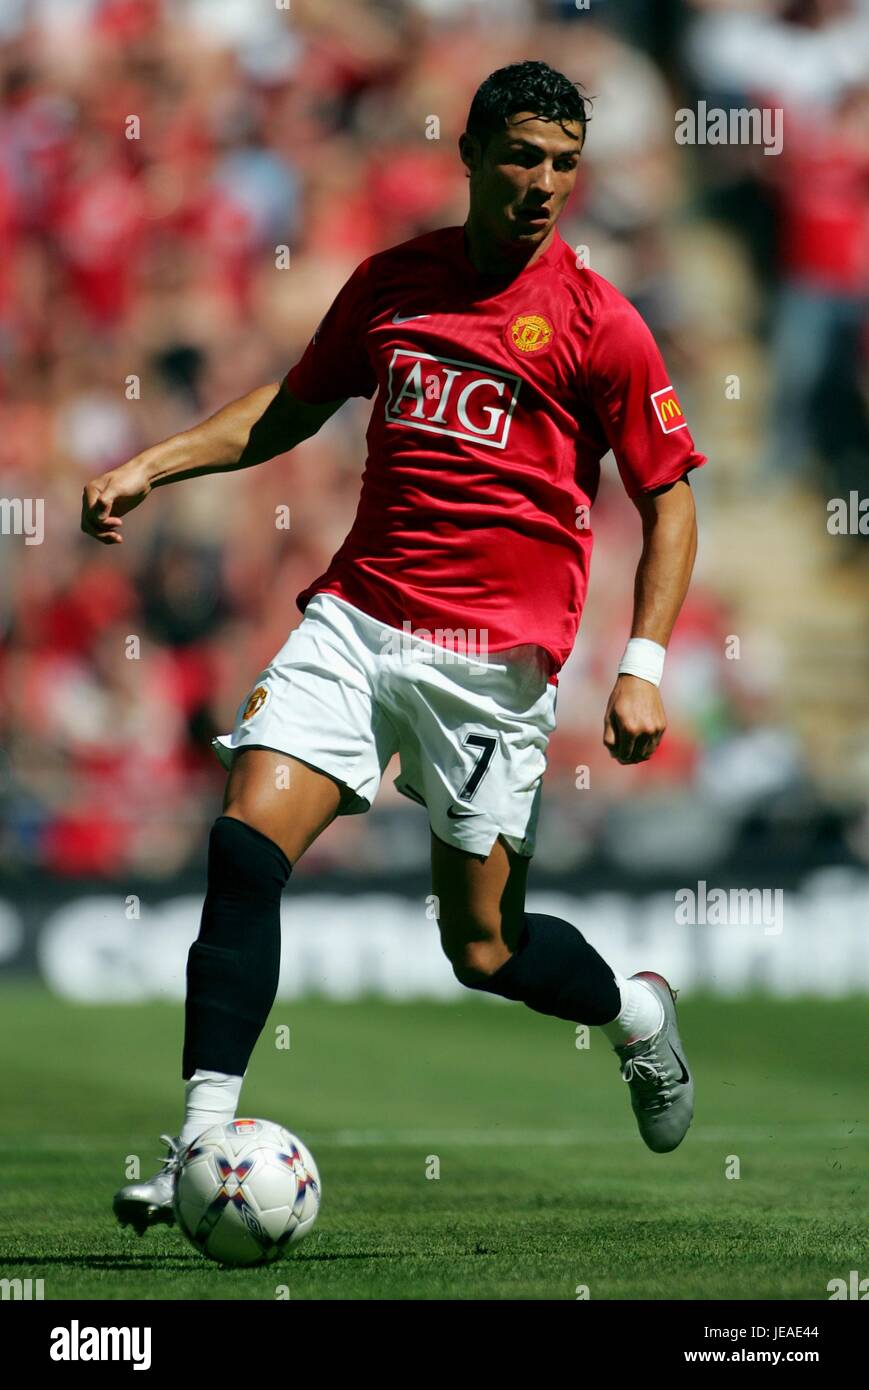 CRISTIANO RONALDO MANCHESTER UNITED FC WEMBLEY Londres Angleterre 05 Août 2007 Banque D'Images